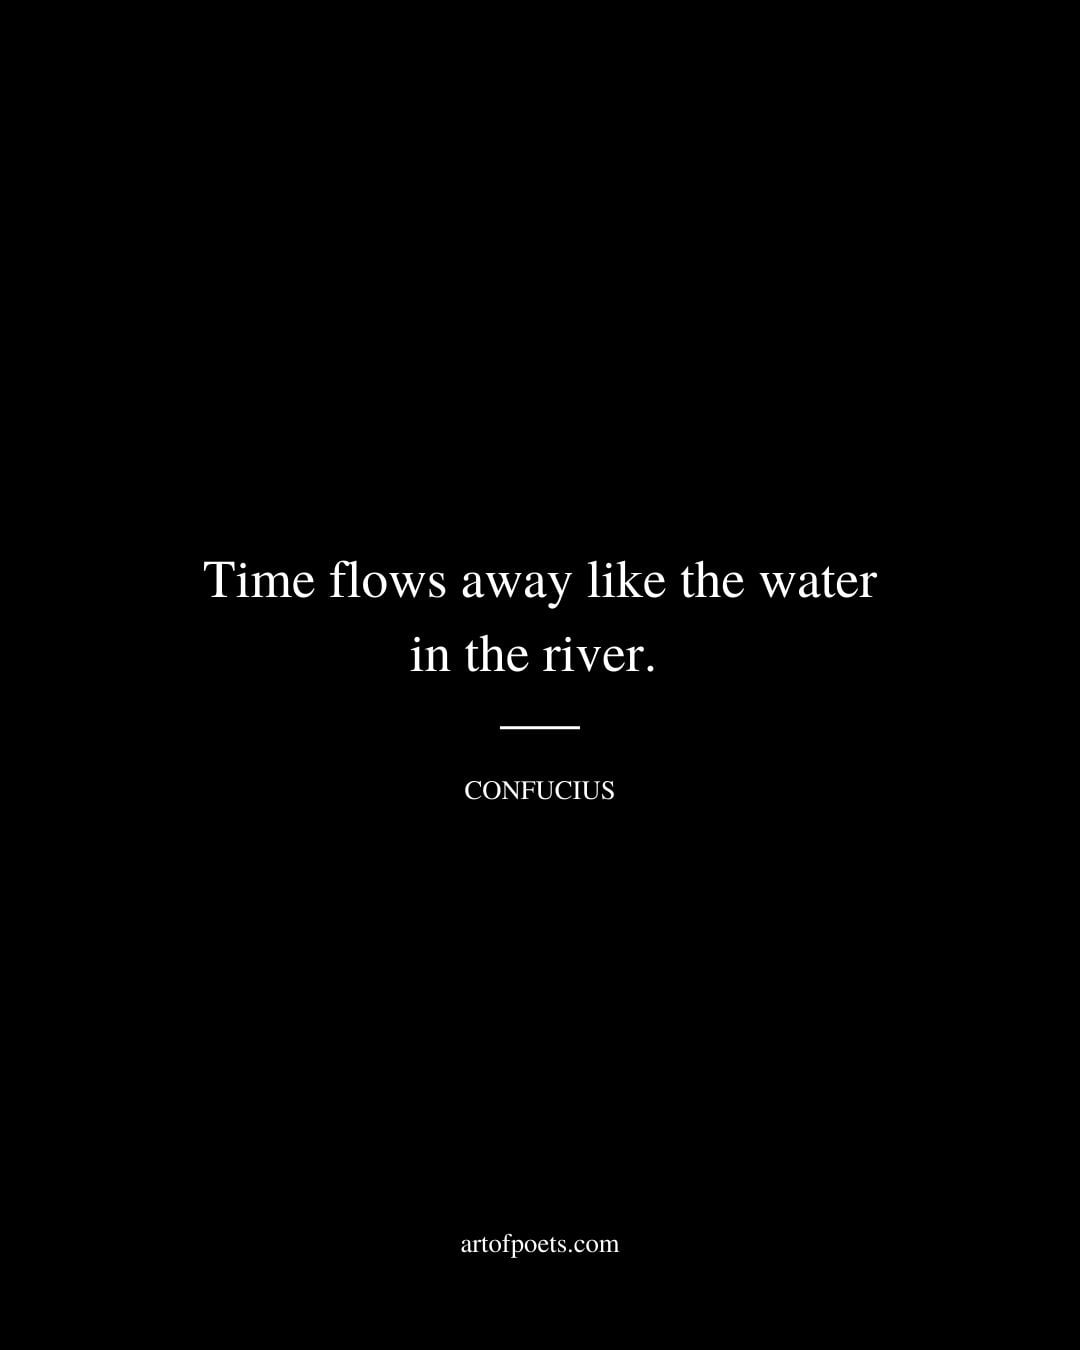 Time flows away like the water in the river